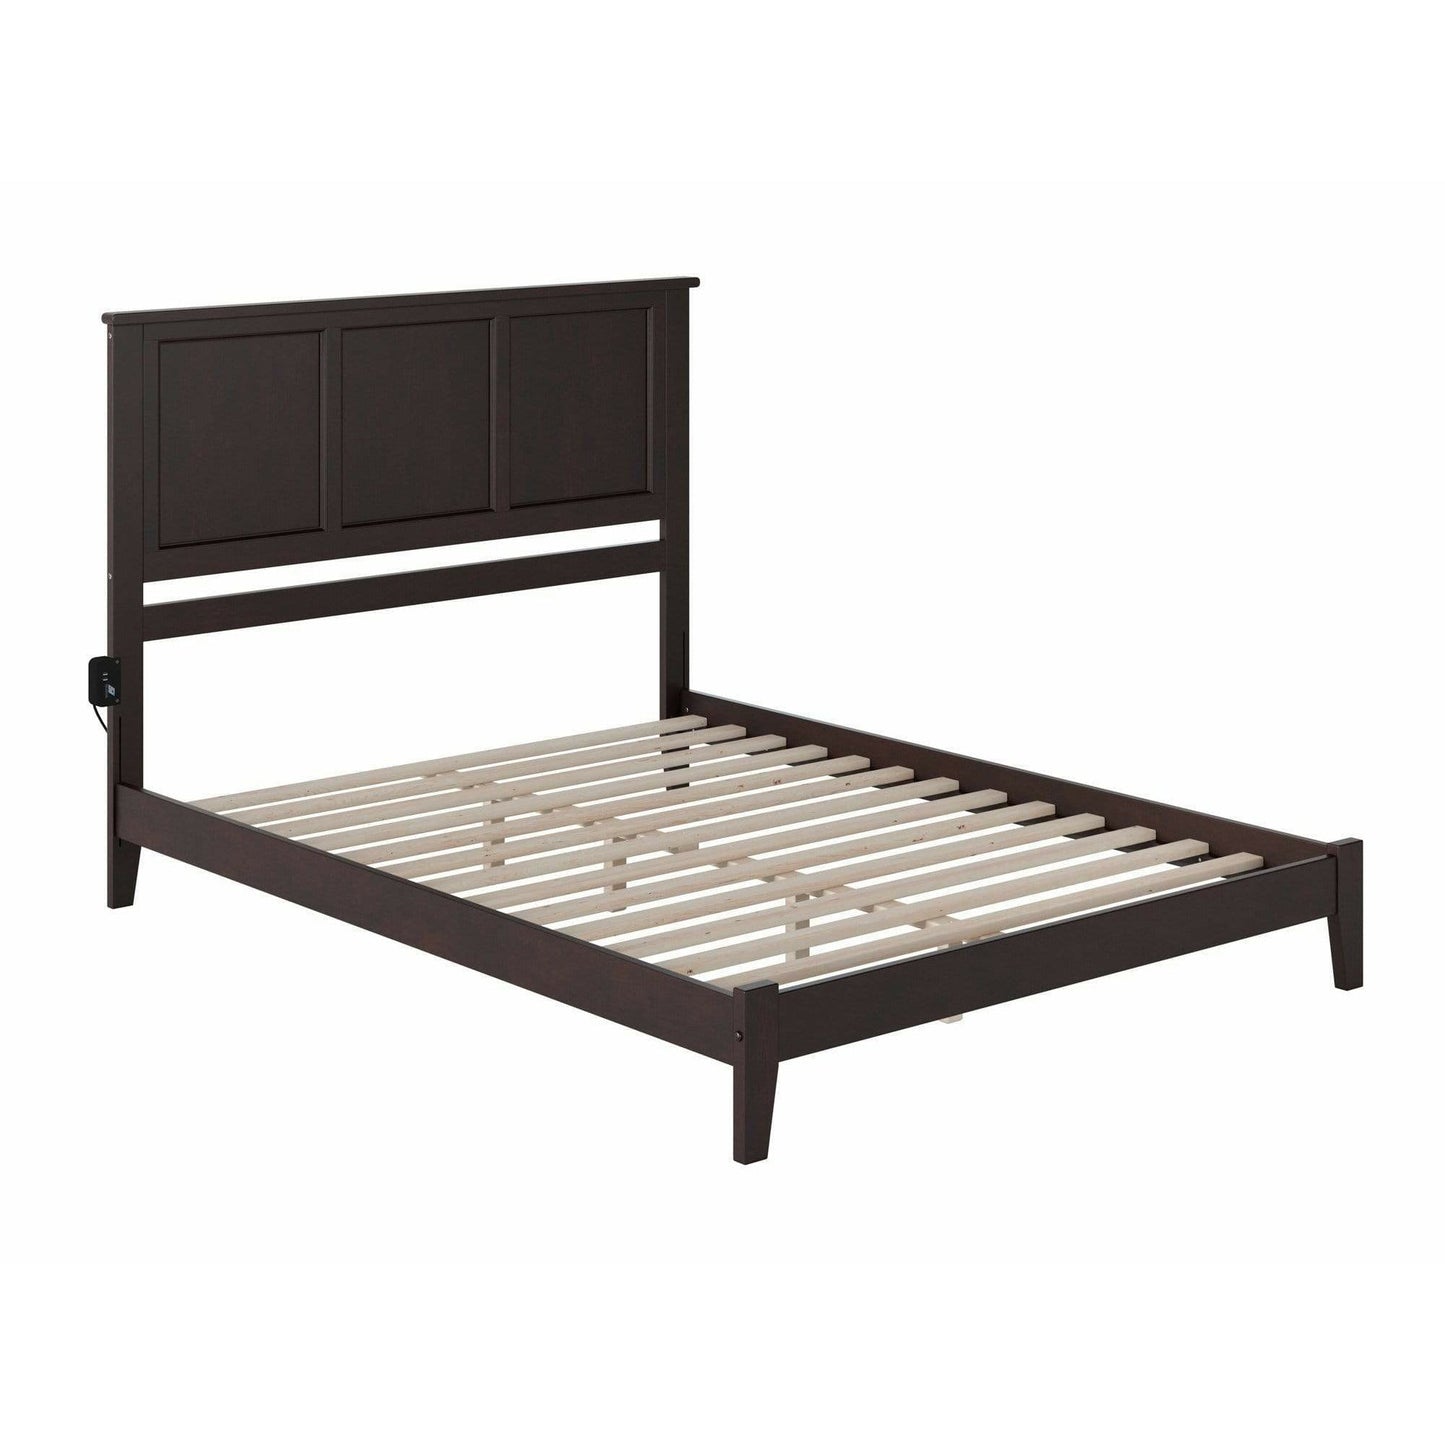 Atlantic Furniture Bed Madison Queen Platform Bed with Open Foot Board in Espresso